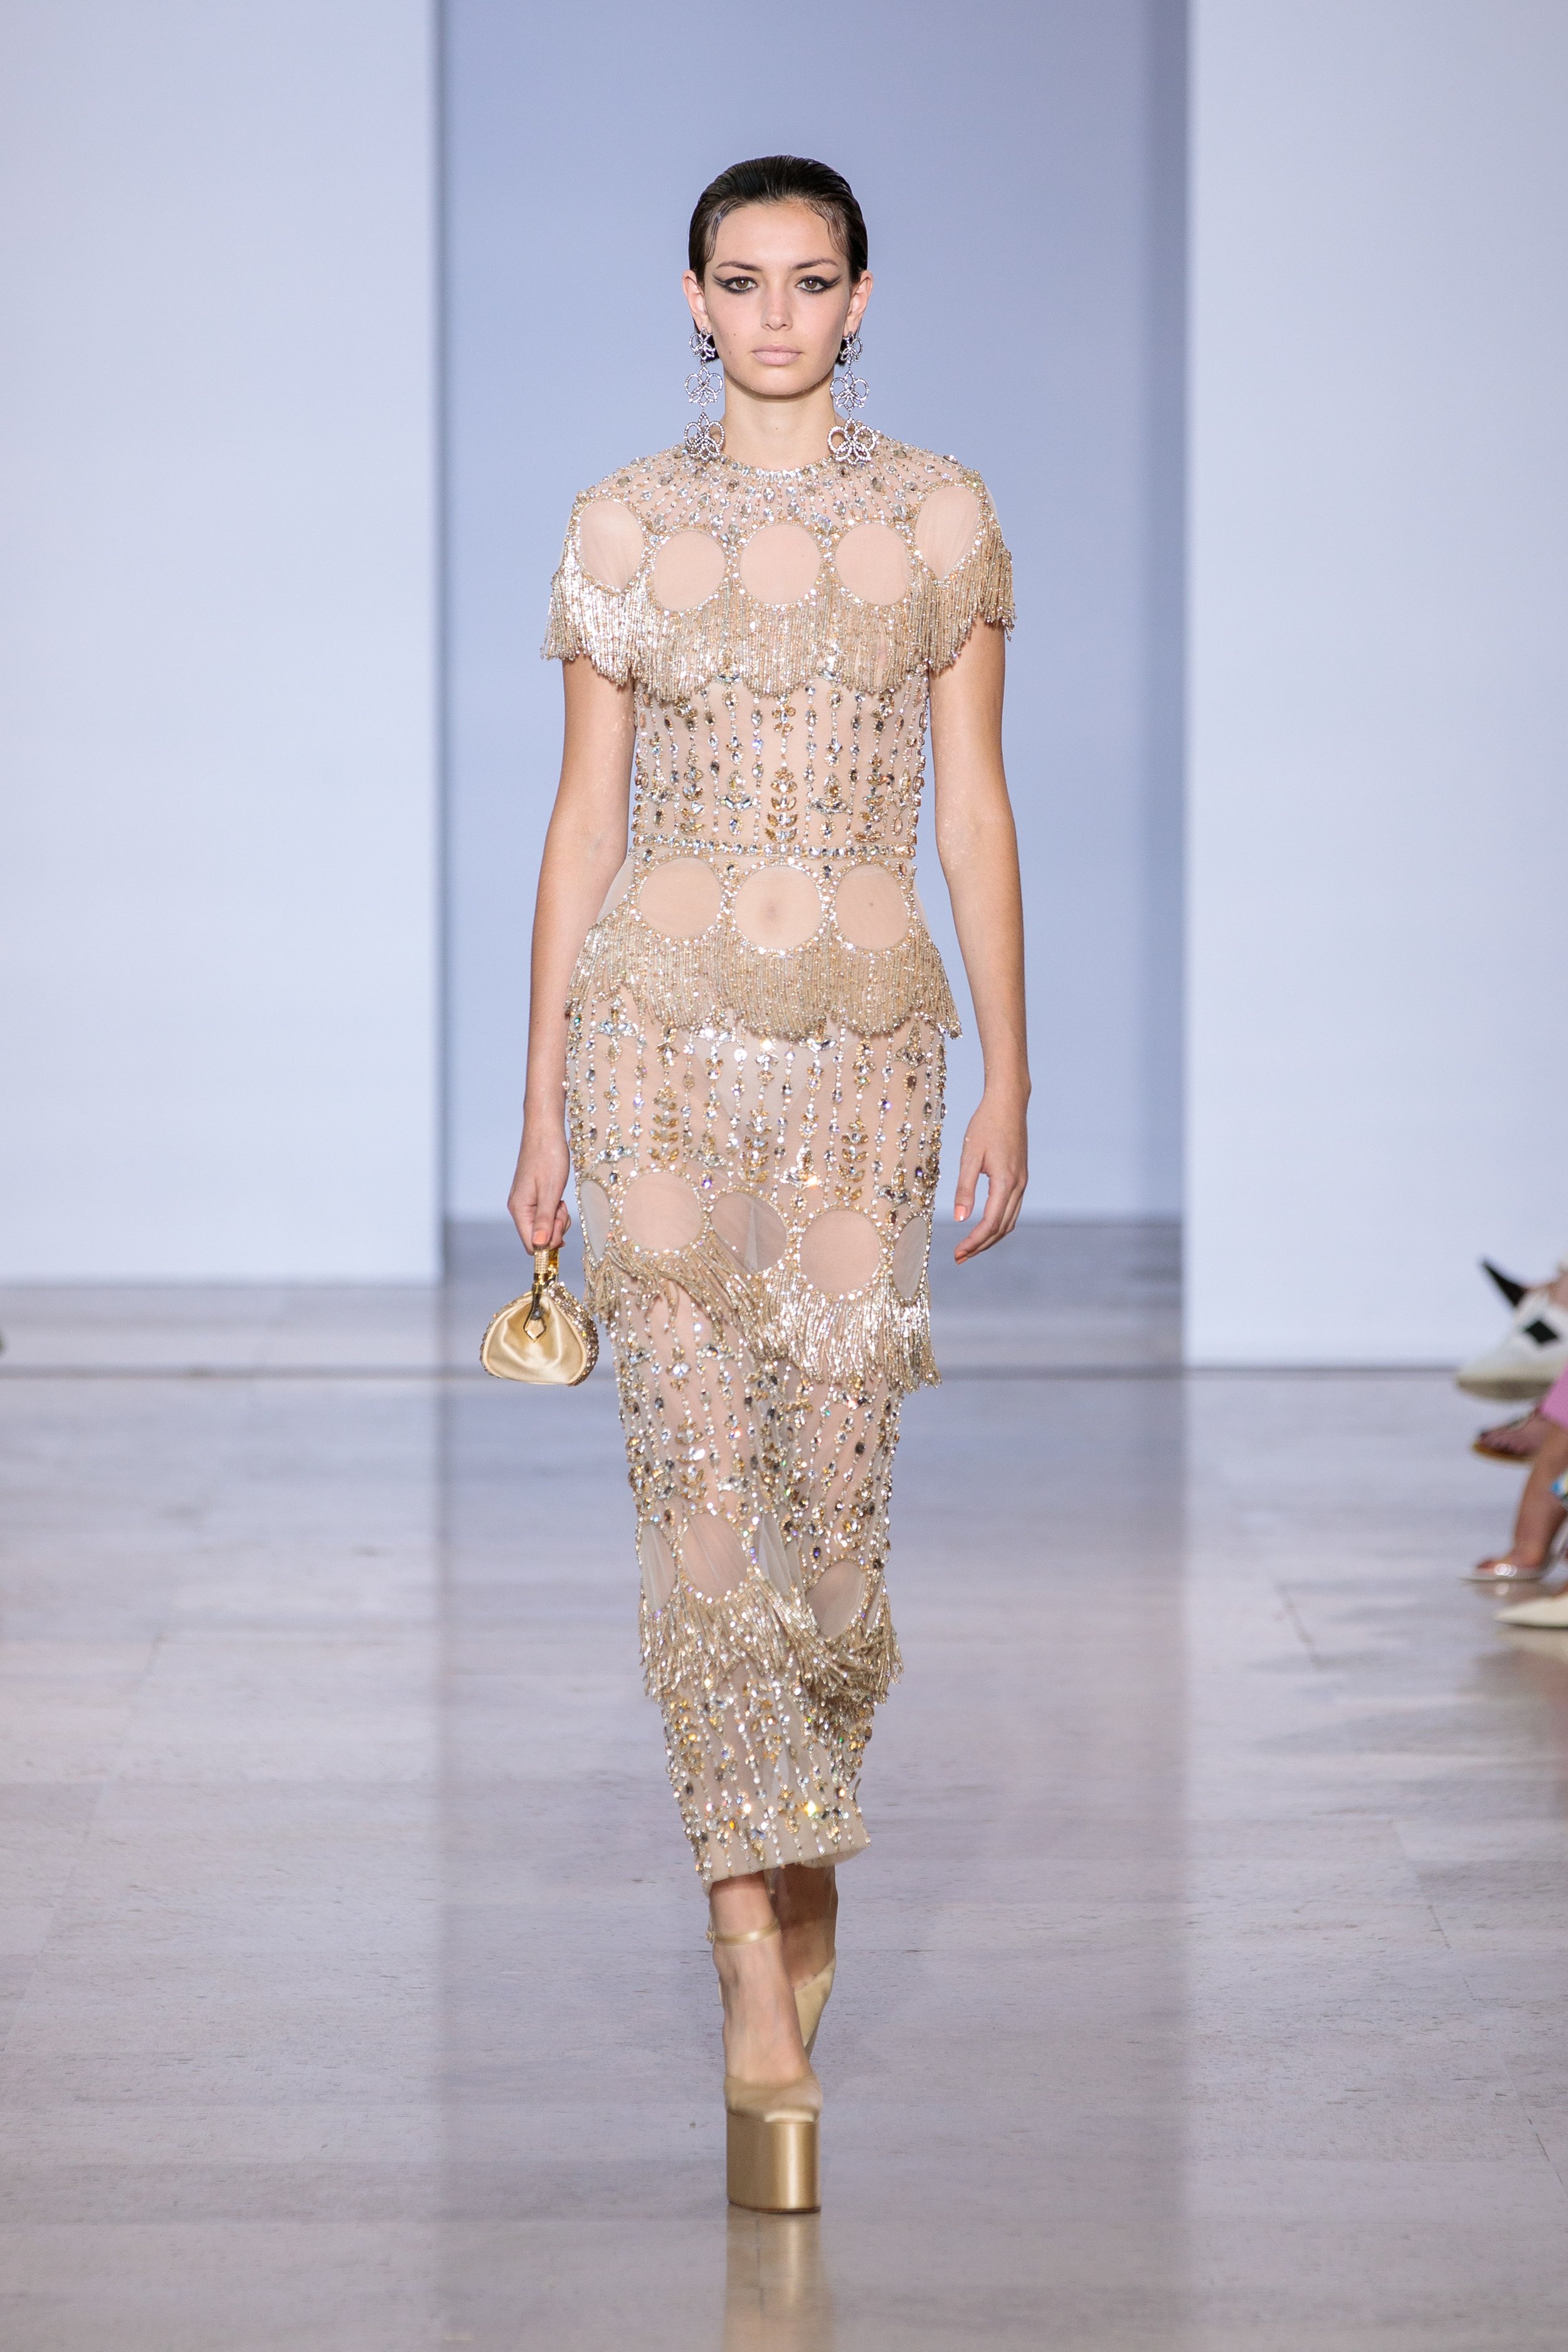 Fall 2022 Haute Couture: Georges Hobeika's Eternal Gifts — CoutureNotebook